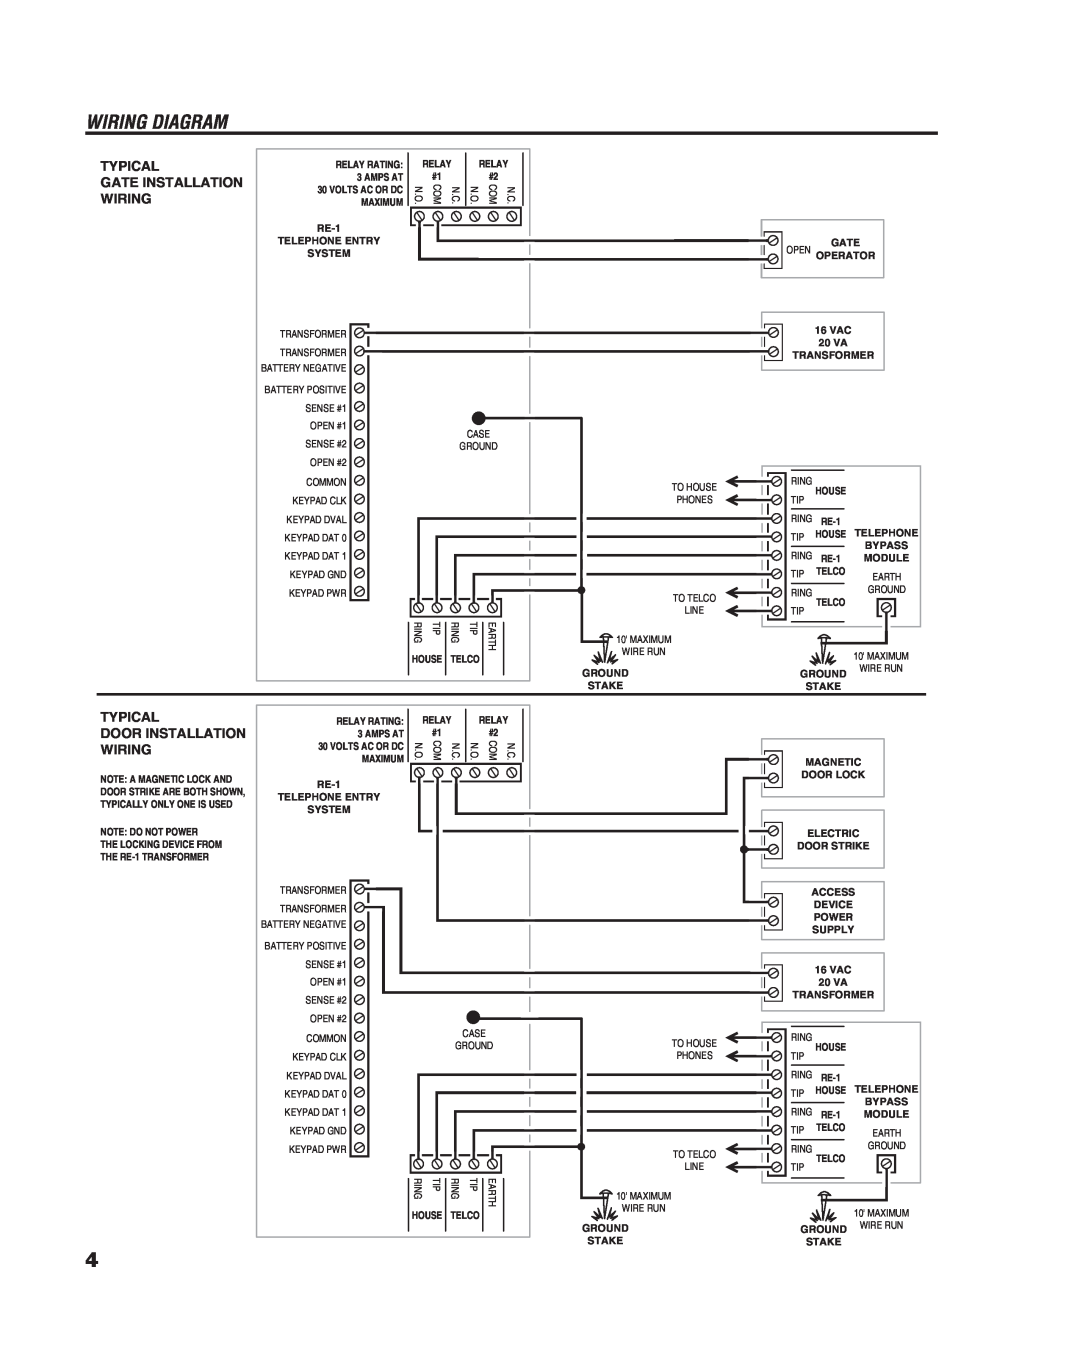 Linear RE-1 manual Wiring Diagram, Typical Gate Installation Wiring, Typical Door Installation Wiring 